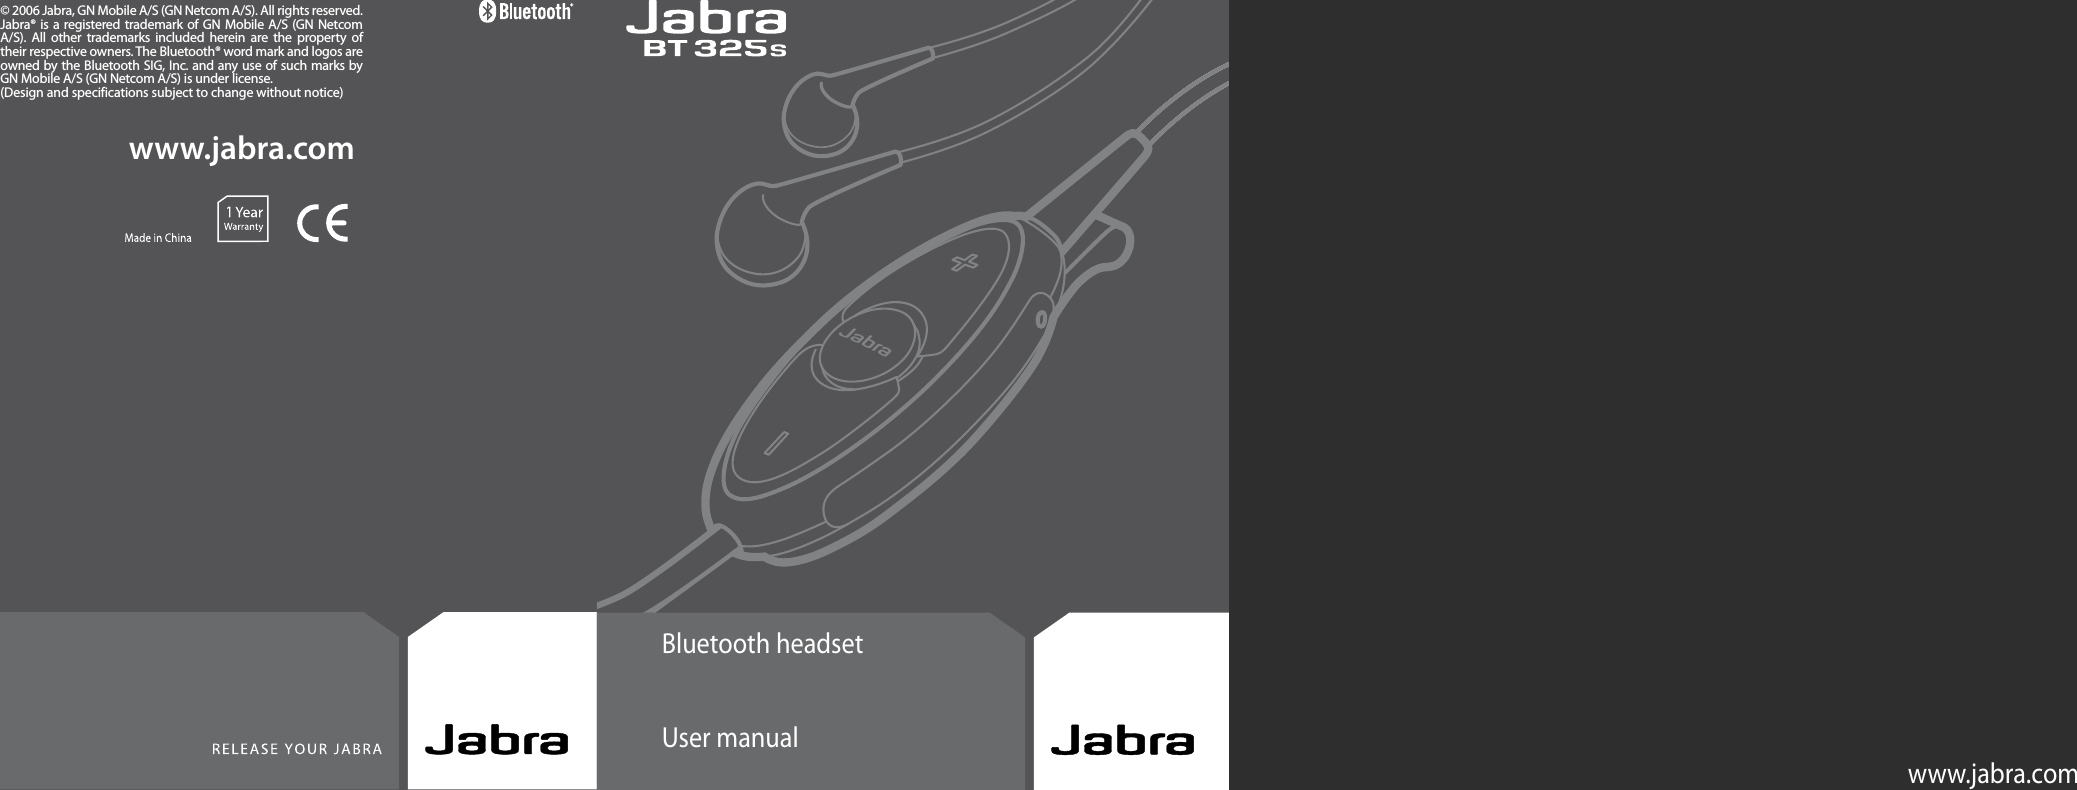 Bluetooth headsetUser manualwww.jabra.comwww.jabra.com© 2006 Jabra, GN Mobile A/S (GN Netcom A/S). All rights reserved. Jabra® is a registered trademark of GN Mobile A/S  (GN Netcom A/S).  All  other  trademarks  included  herein  are  the  property  of their respective owners. The Bluetooth® word mark and logos are owned by the Bluetooth SIG, Inc. and any use of such marks by GN Mobile A/S (GN Netcom A/S) is under license.(Design and specifications subject to change without notice)